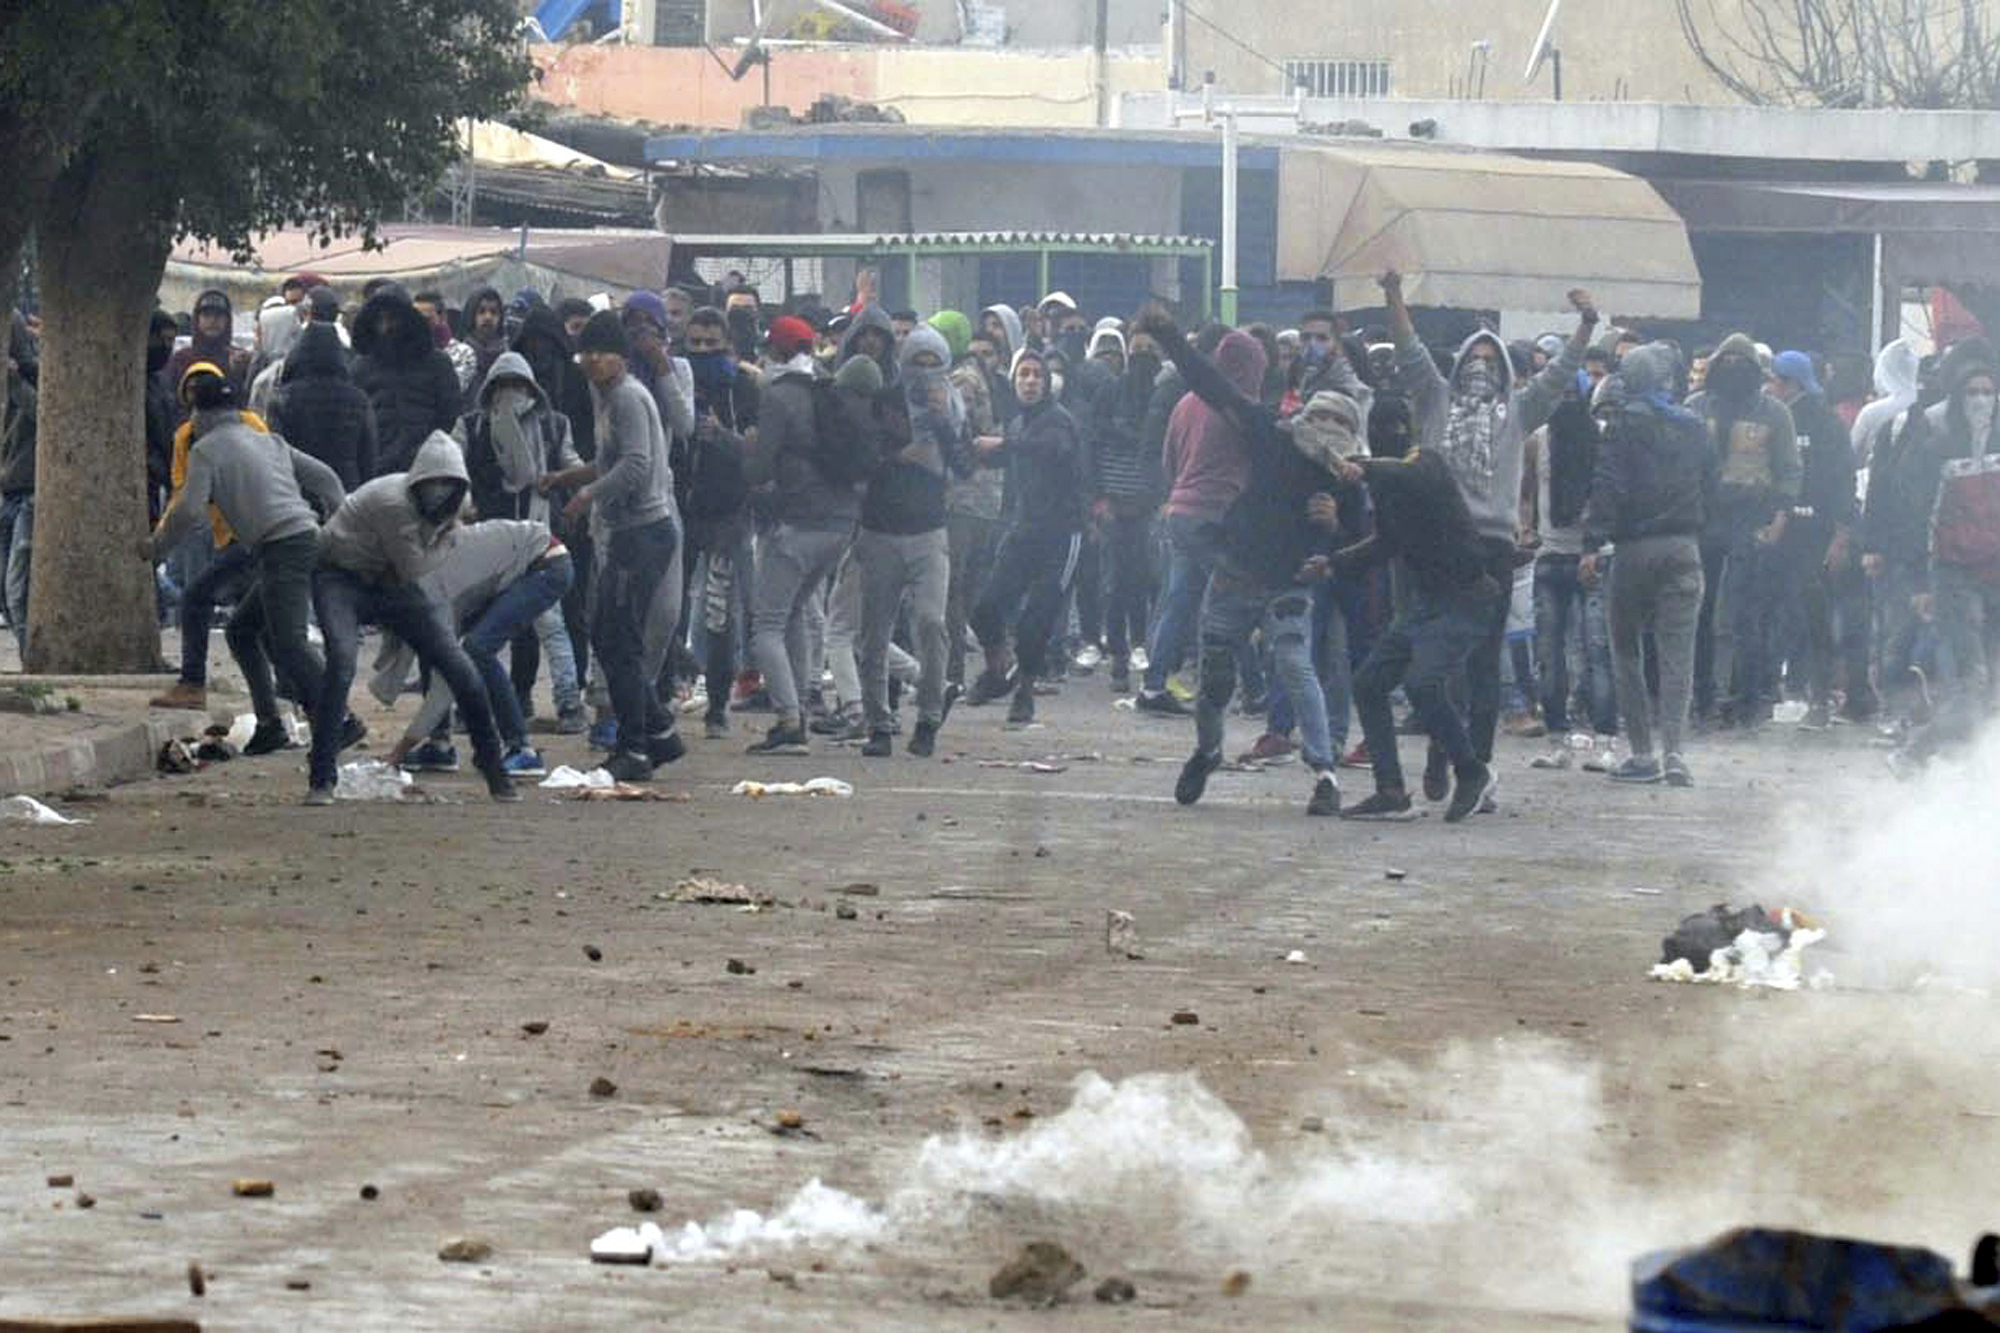 Demonstrators take the streets during anti-government protests, in Tebourba, south of the Tunisian capital, Tunis, Tuesday, Jan. 9, 2018. Tunisia's prime minister promised Tuesday to crack down on rioters after violent protests over price hikes left one person dead and raised fears of broader unrest in the country that was the birthplace of the Arab Spring. (AP Photo/Anis Ben Ali)